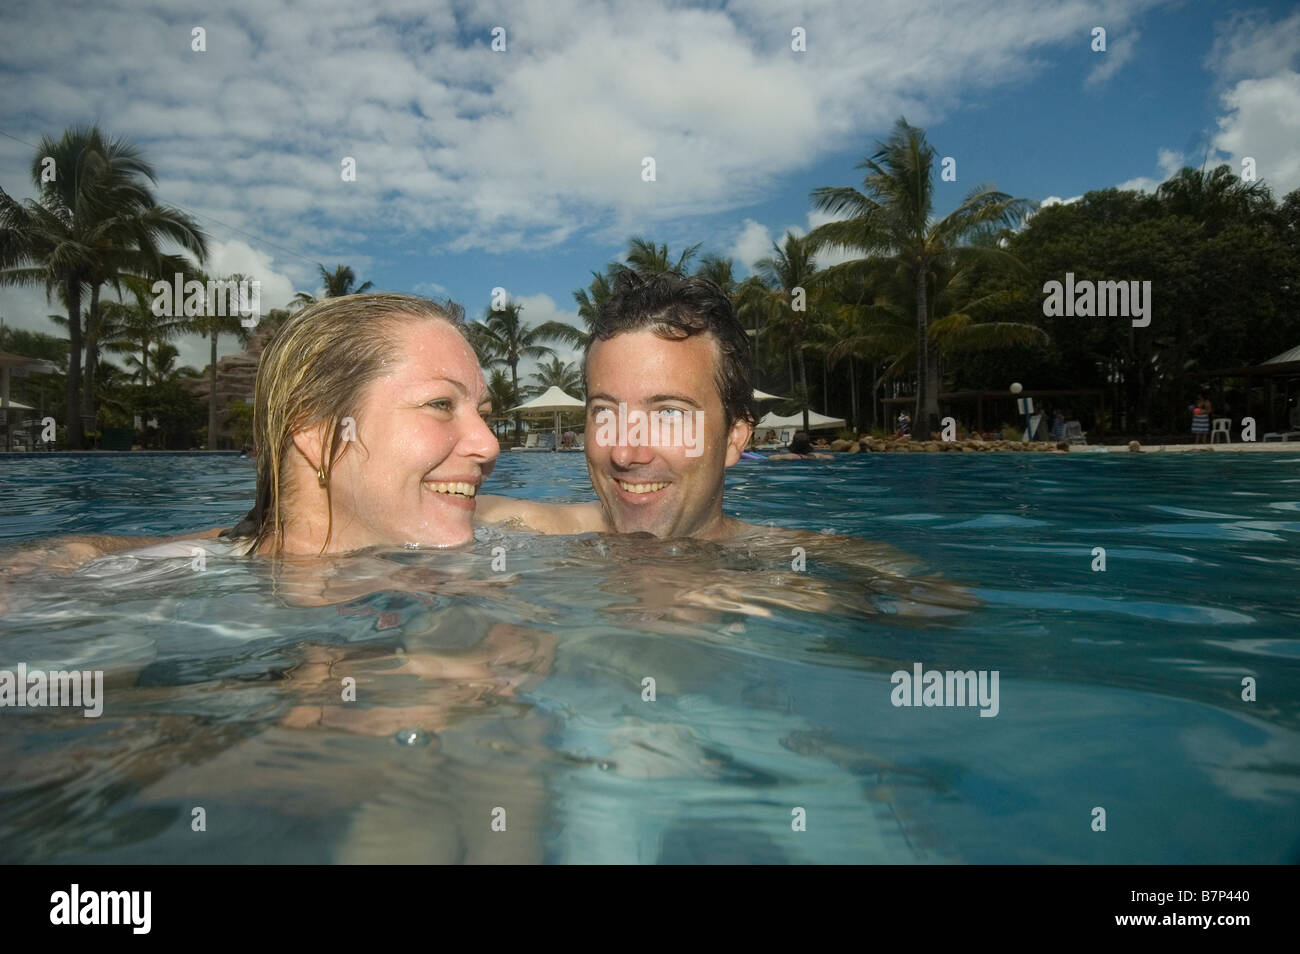 Couple in swimming pool Banque D'Images